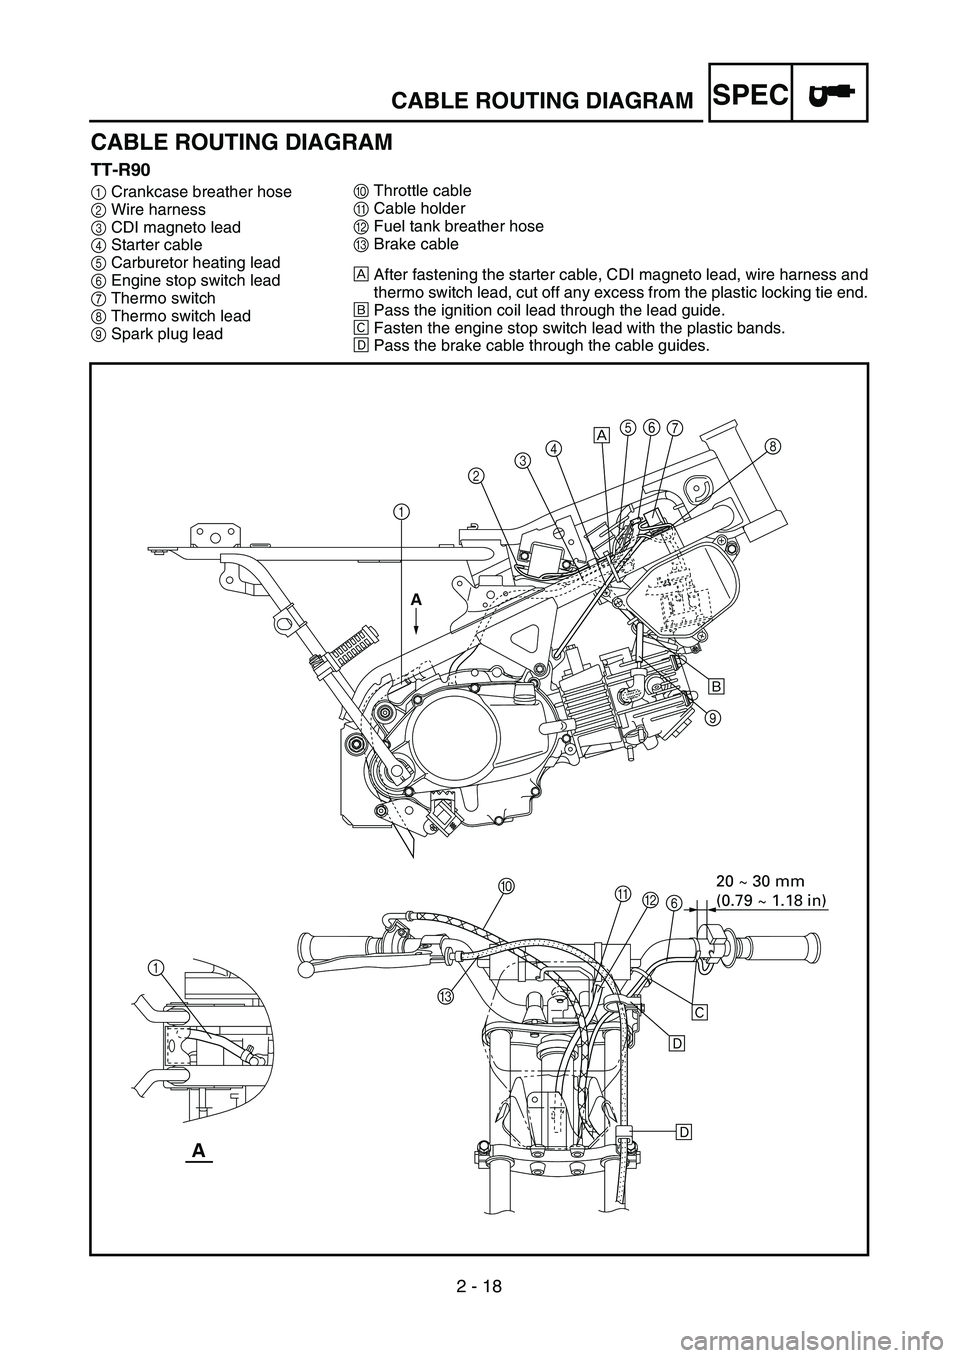 YAMAHA TTR90 2004  Owners Manual  
2 - 18
SPEC
 
CABLE ROUTING DIAGRAM 
TT-R90 
1  
Crankcase breather hose  
2  
Wire harness  
3  
CDI magneto lead  
4 
Starter cable  
5 
Carburetor heating lead 
6 
Engine stop switch lead 
7 
The